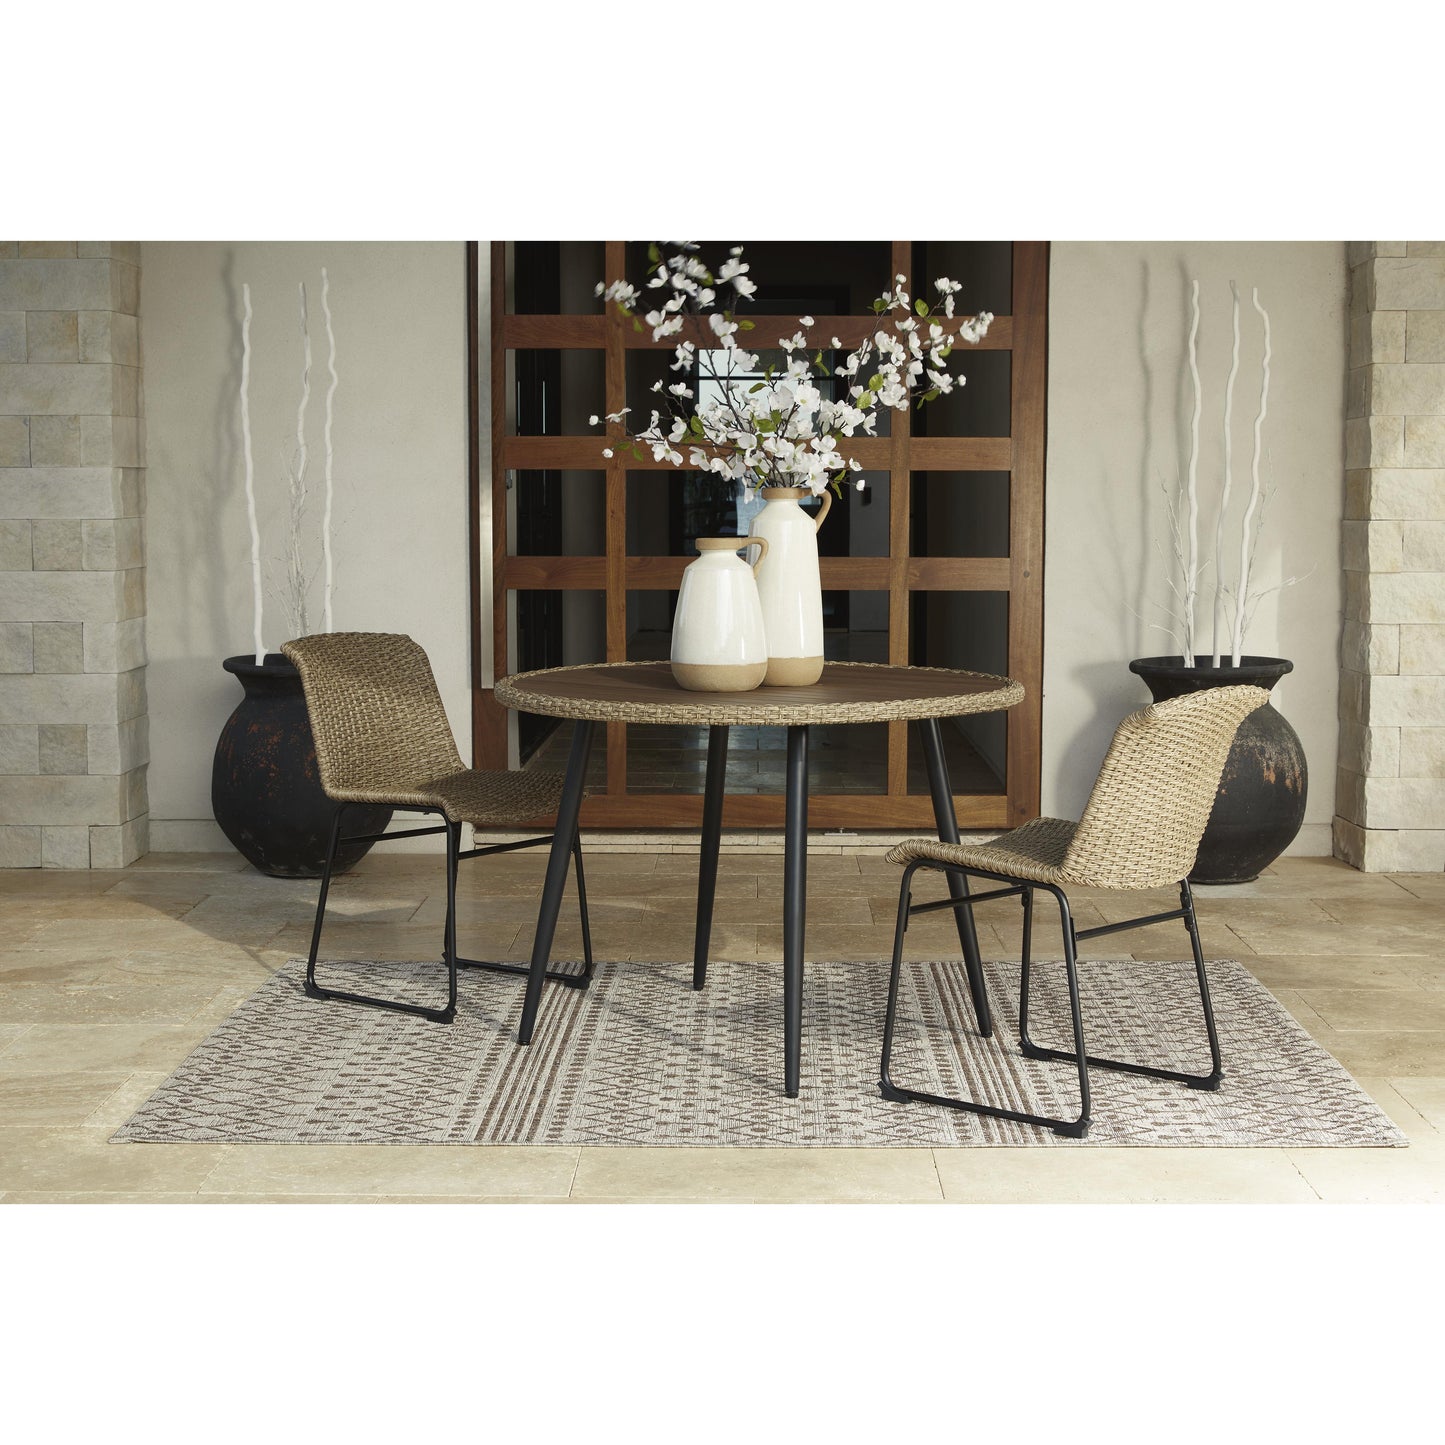 Signature Design by Ashley Outdoor Seating Dining Chairs P369-601 IMAGE 6